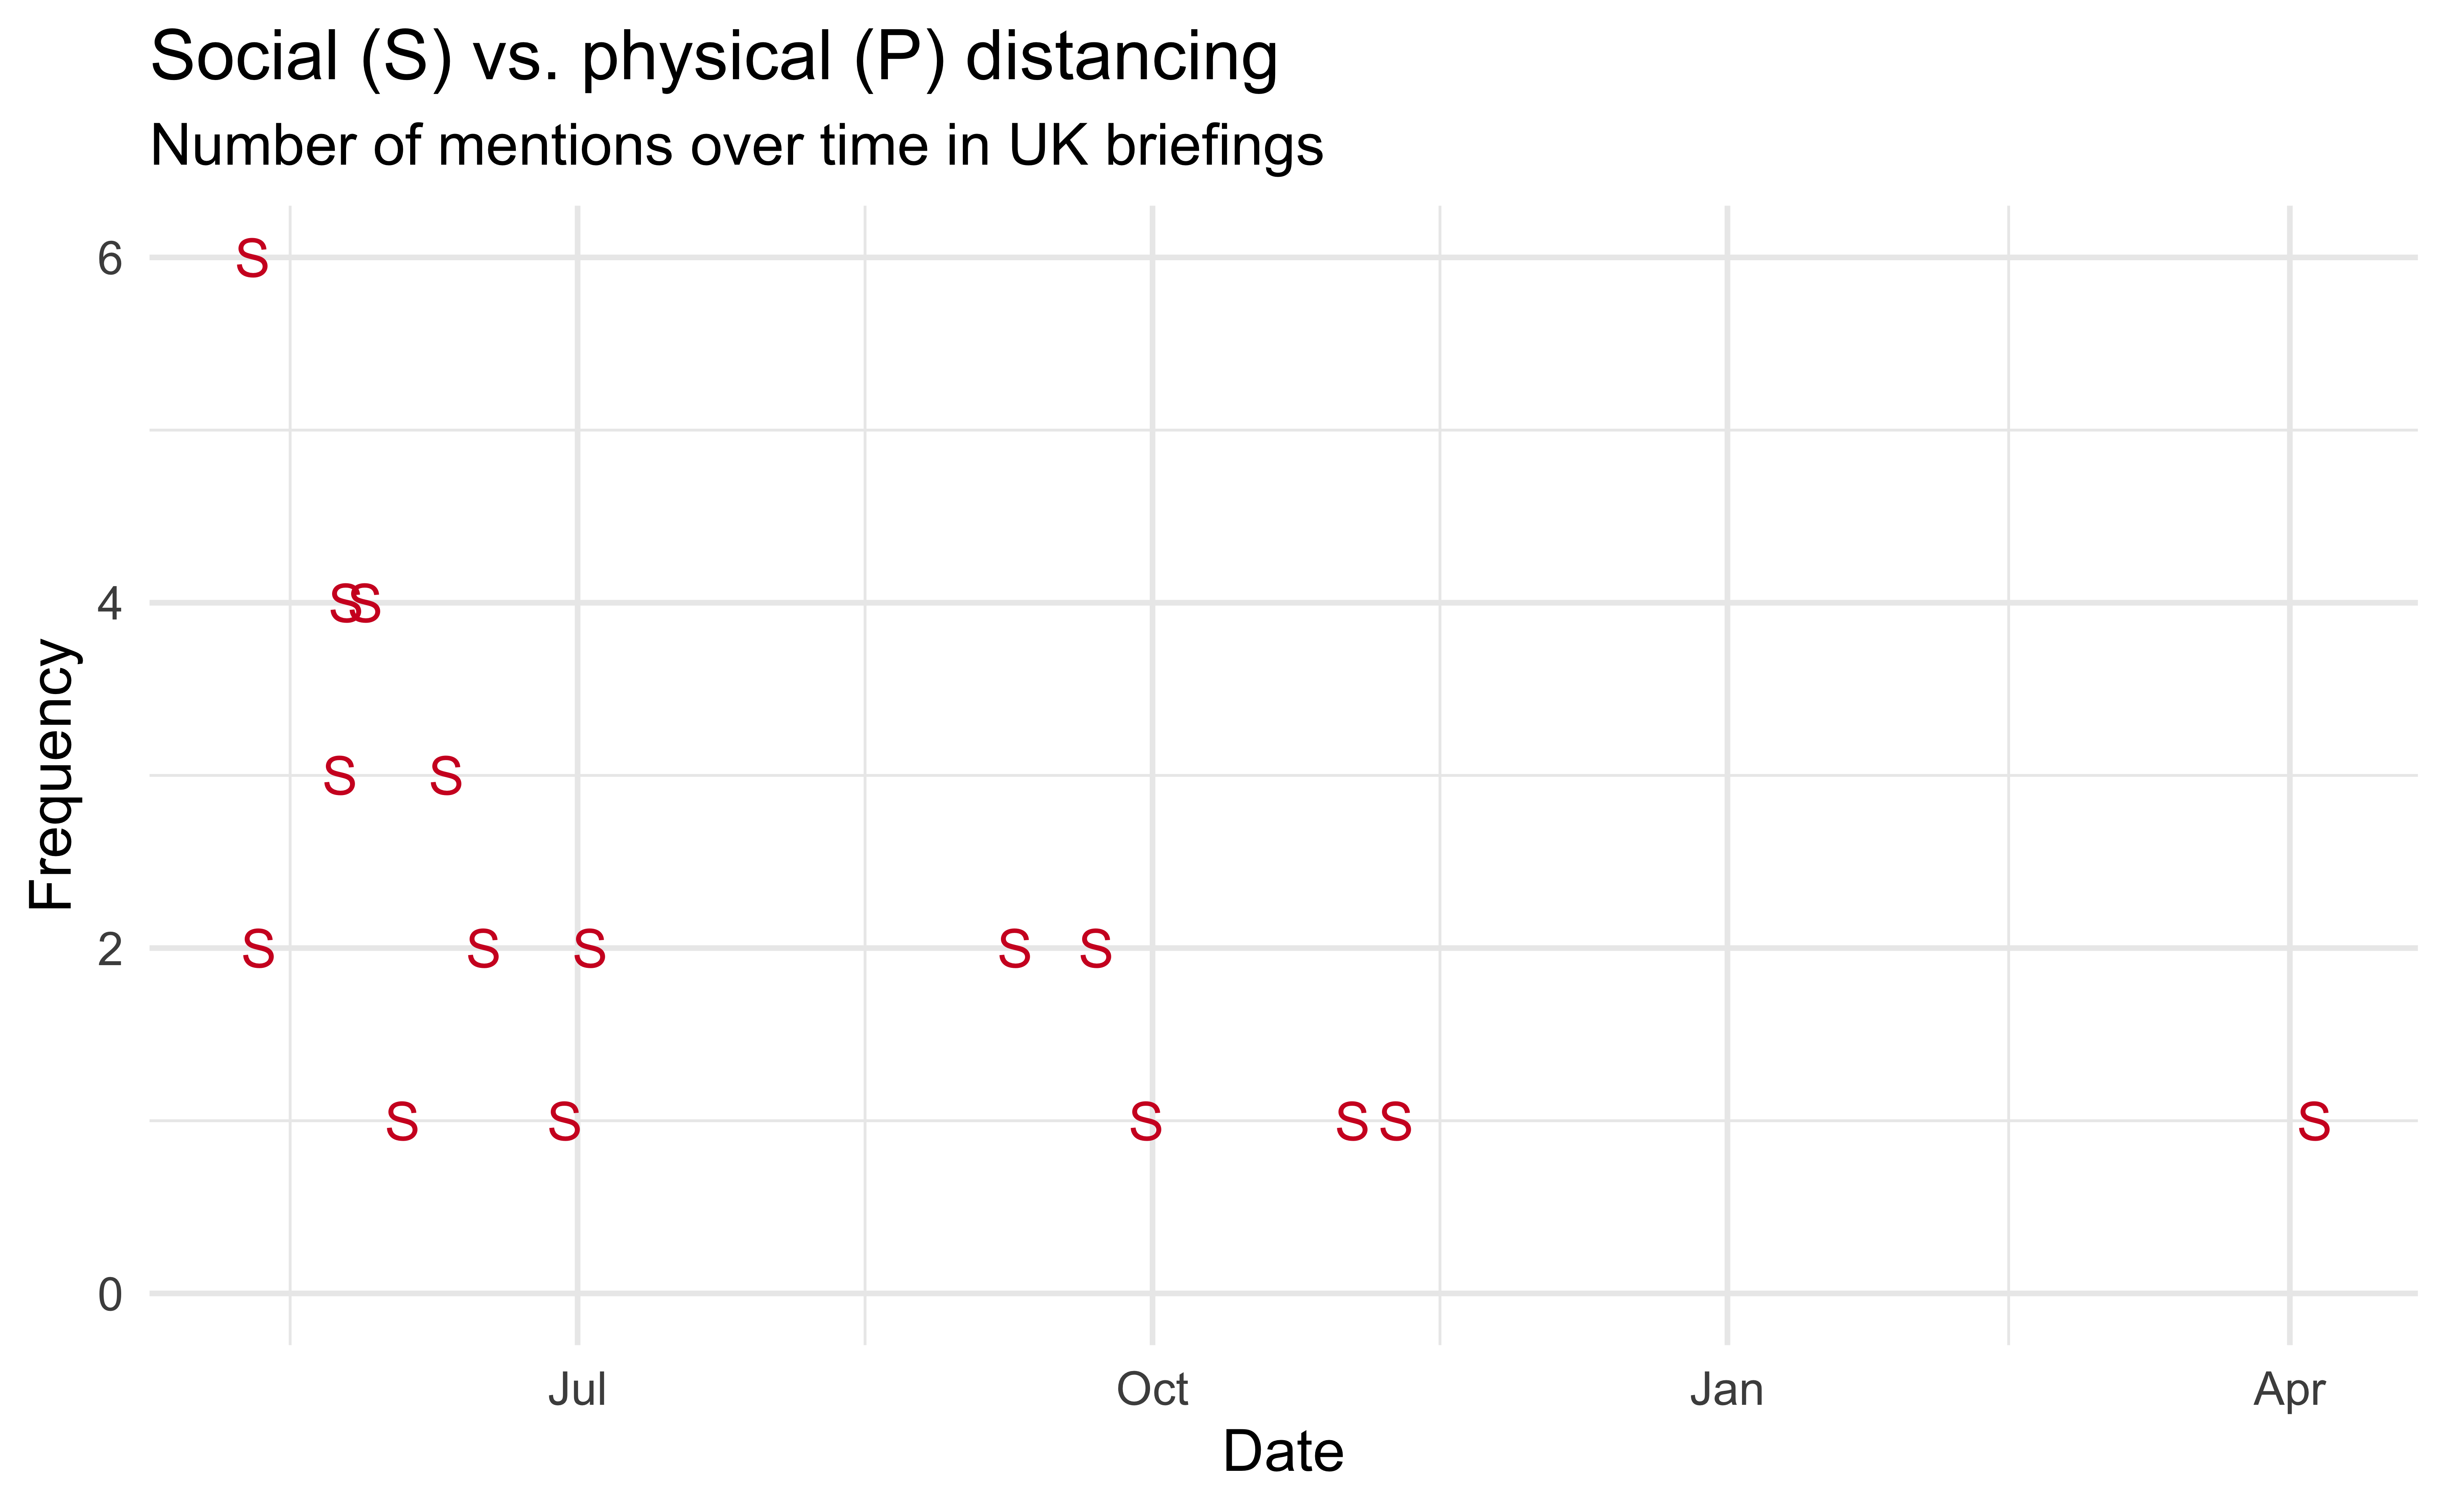 Number of times the phrase social distancing or physical distancing appeared in the briefings over time in UK briefings. The phrase physical distancing is never used.